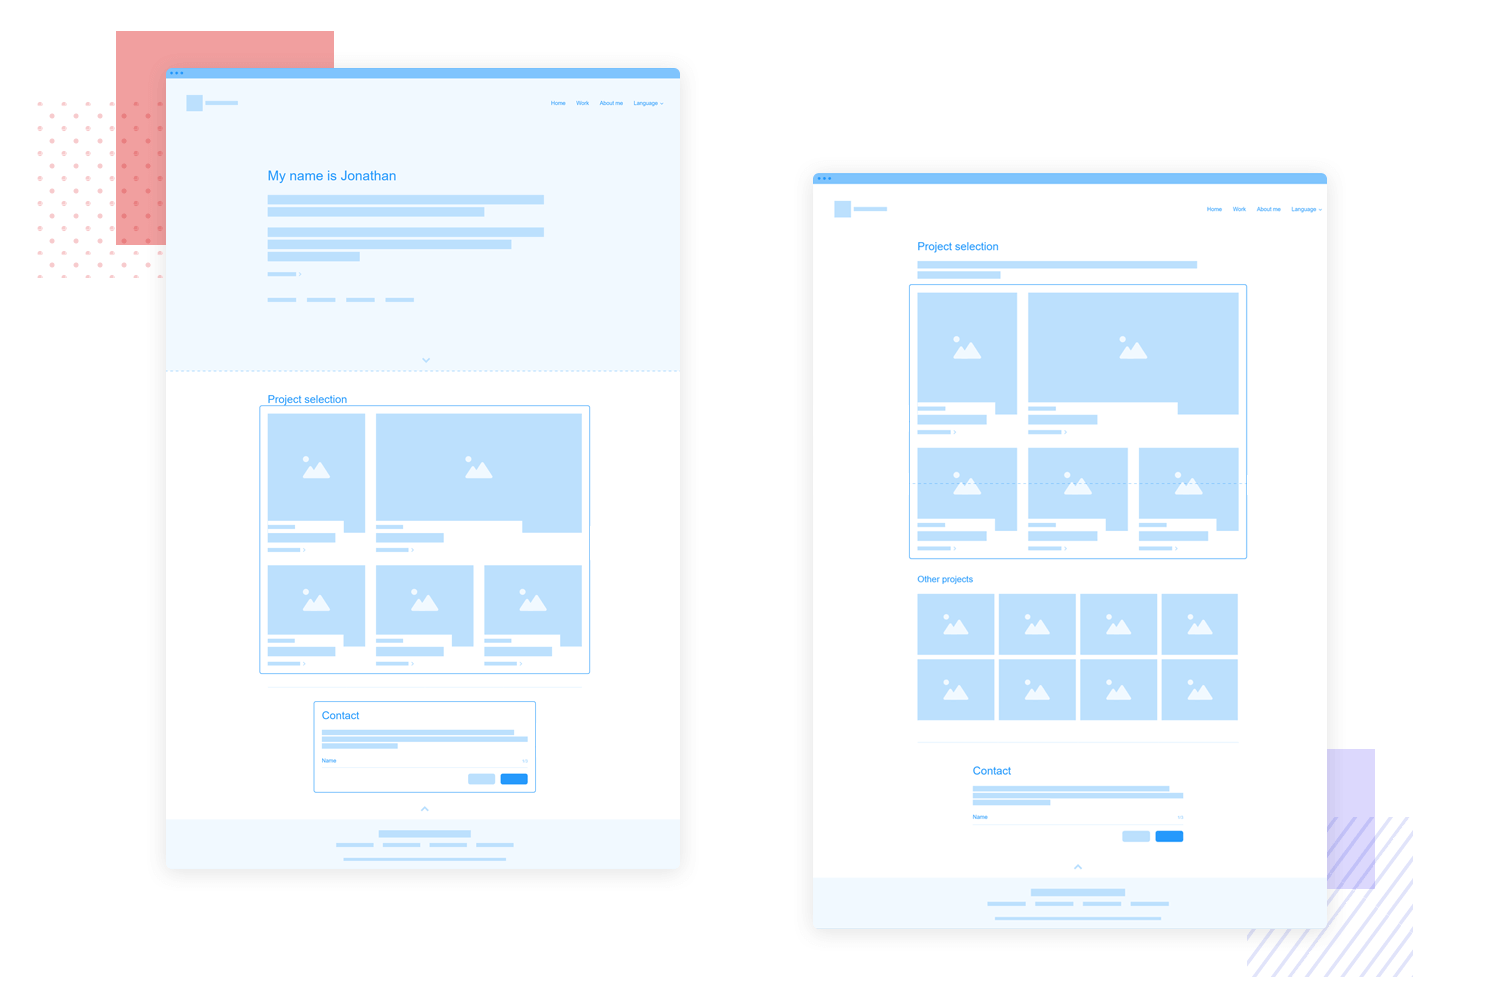 High-fidelity UX design wireframes for a portfolio website showcasing personal details, project selection, and a contact form, in a clean blue-toned layout.